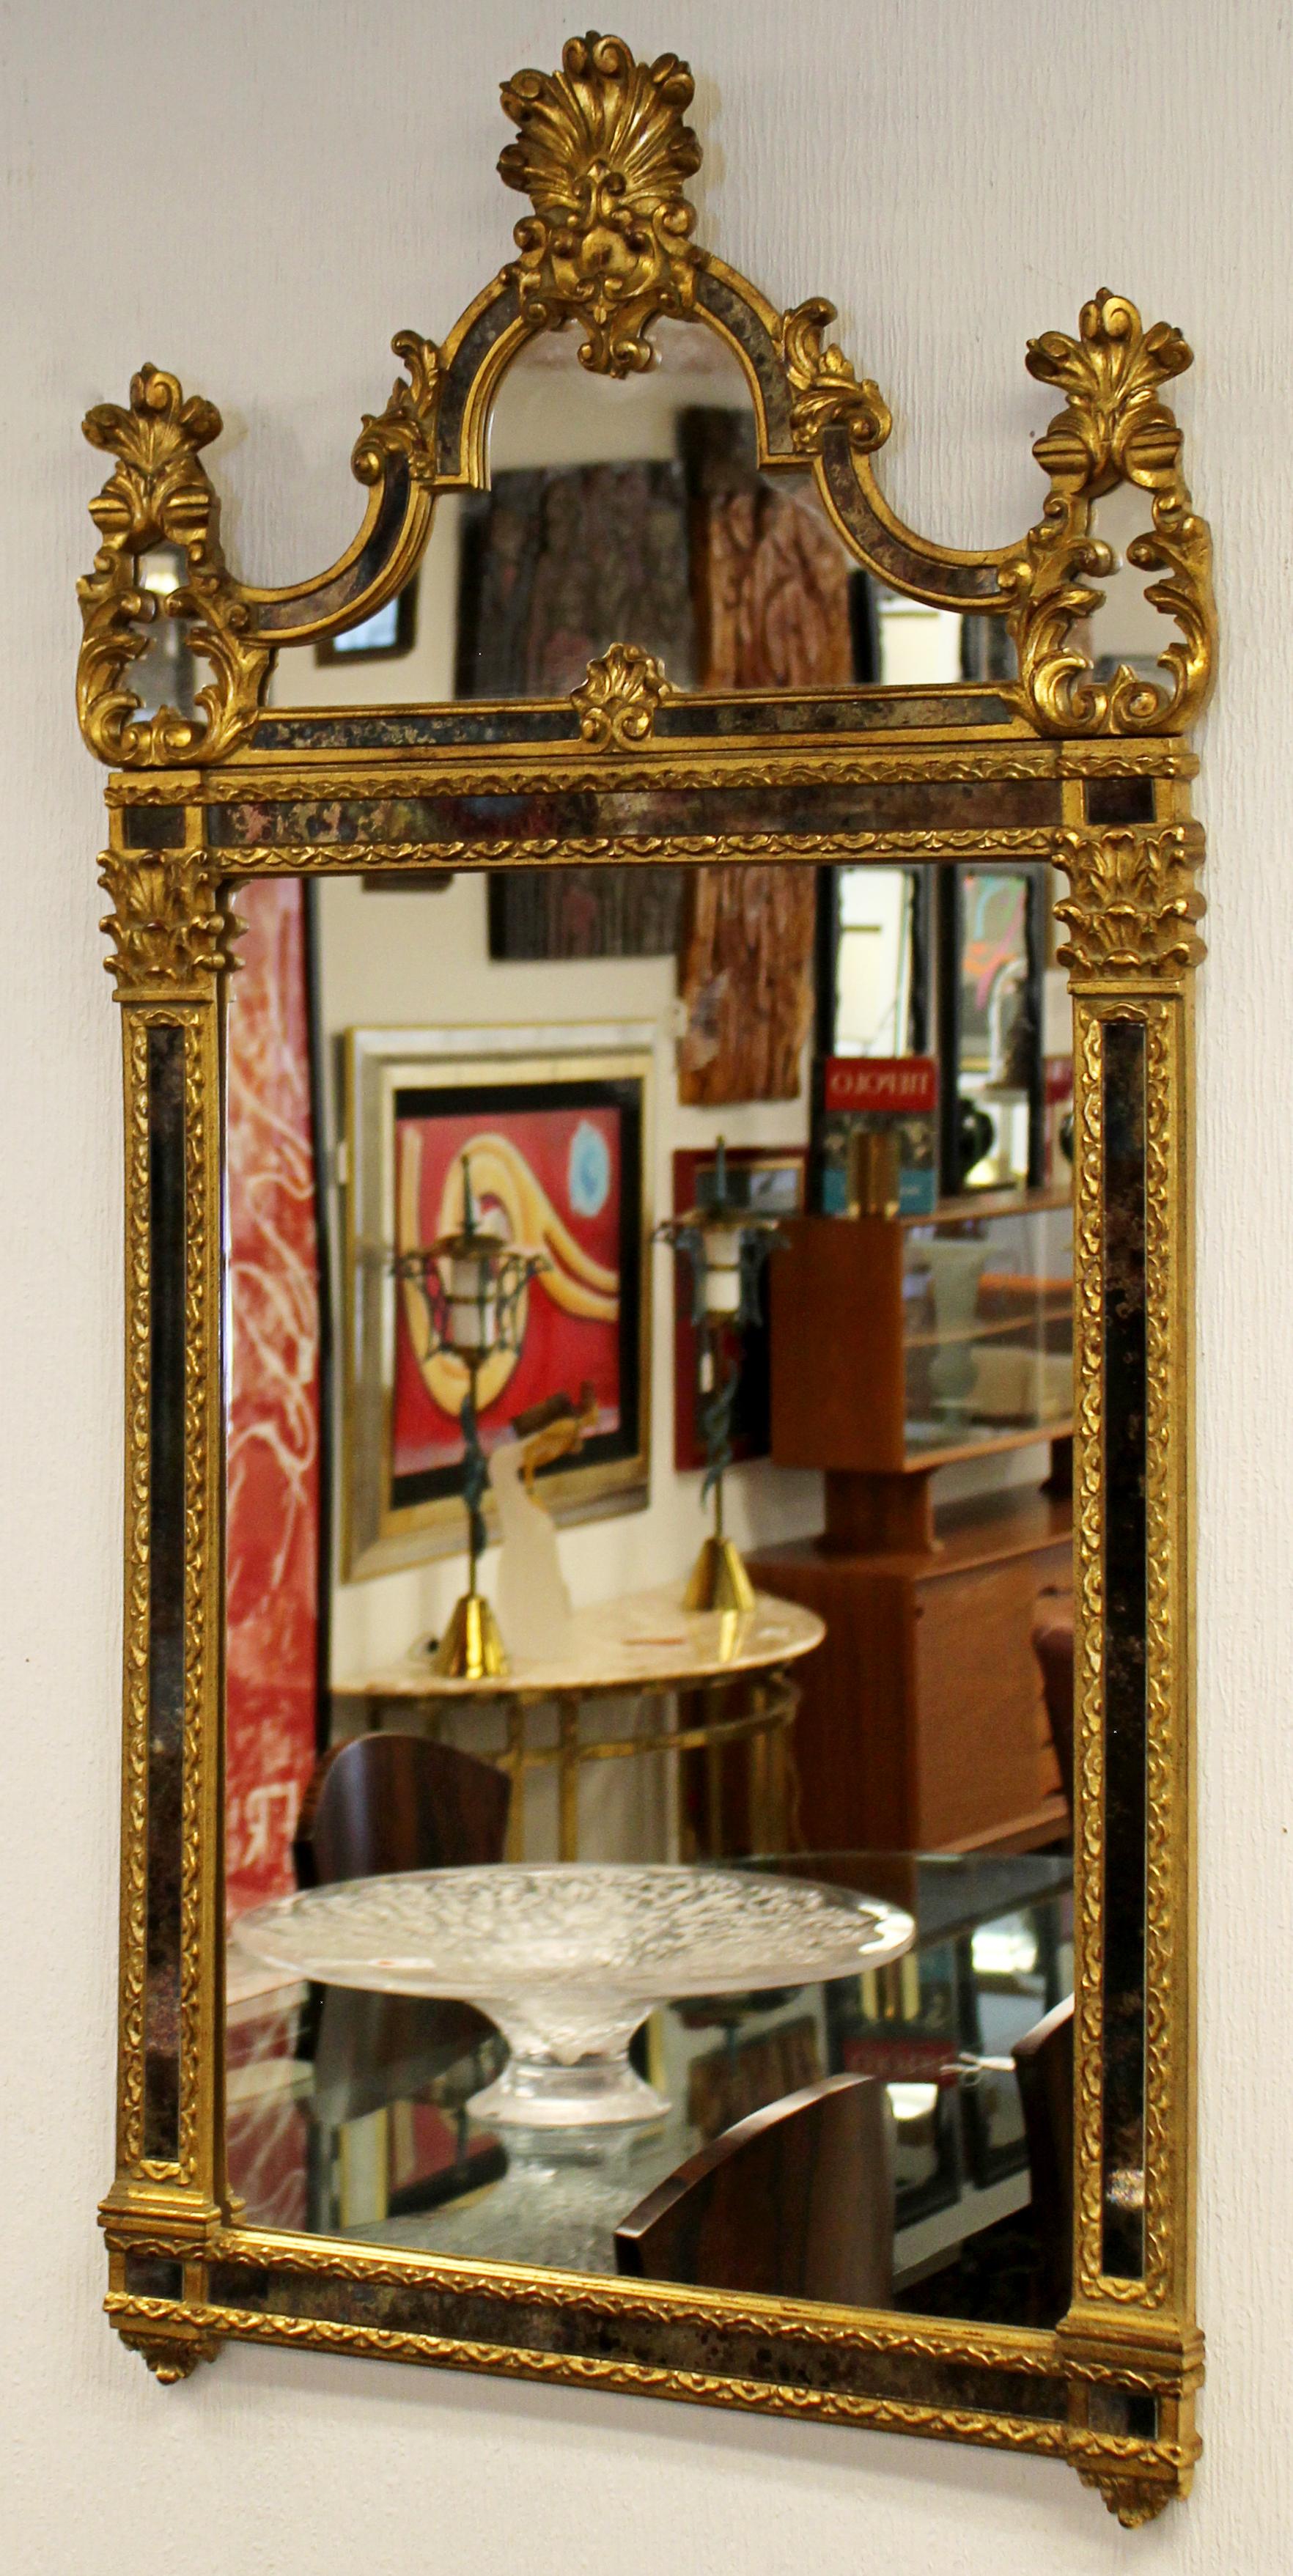 For your consideration is a regal looking, hand painted, gold giltwood wall mirror by La Barge, circa 1950s. In excellent vintage condition. The dimensions are 26